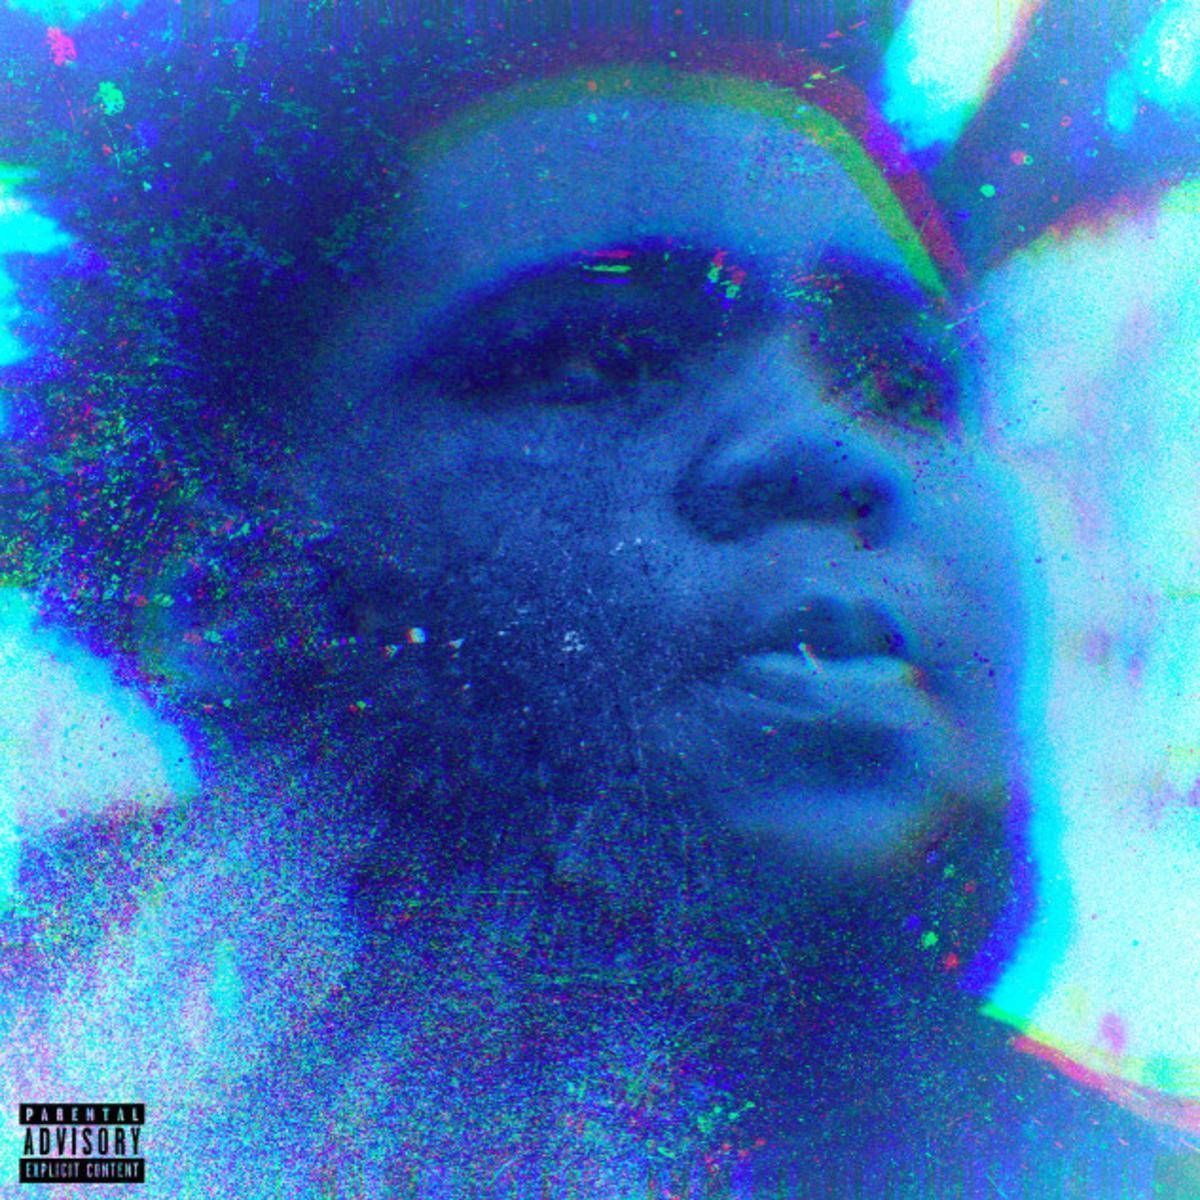 The cover of a man with blue hair - Rod Wave